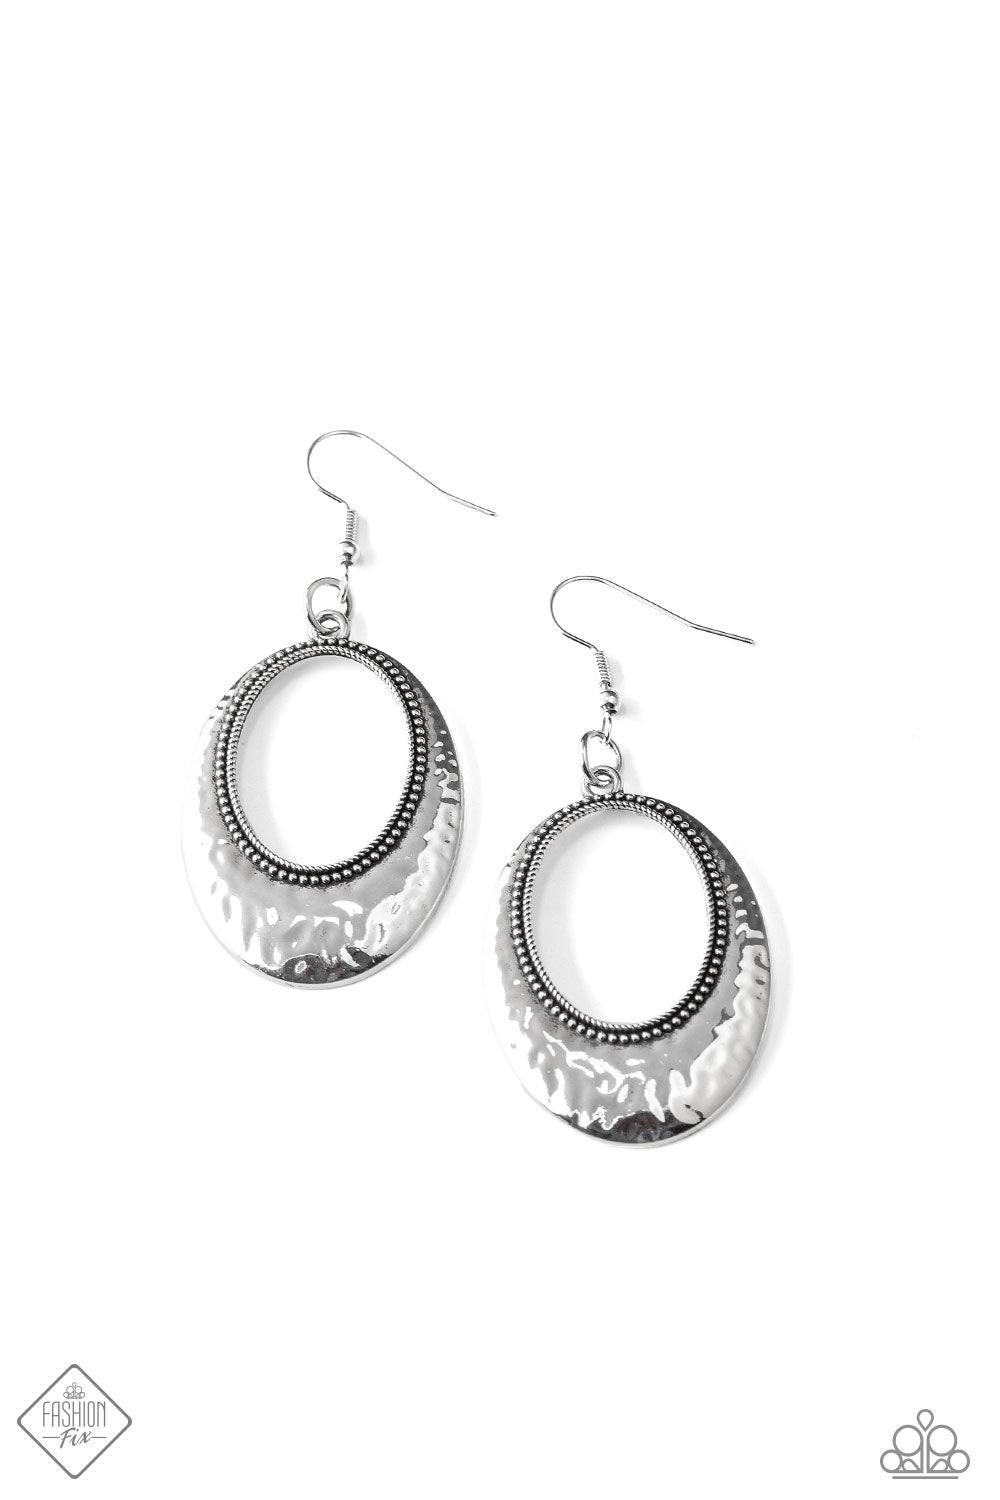 Tempest Texture - silver - Paparazzi earrings